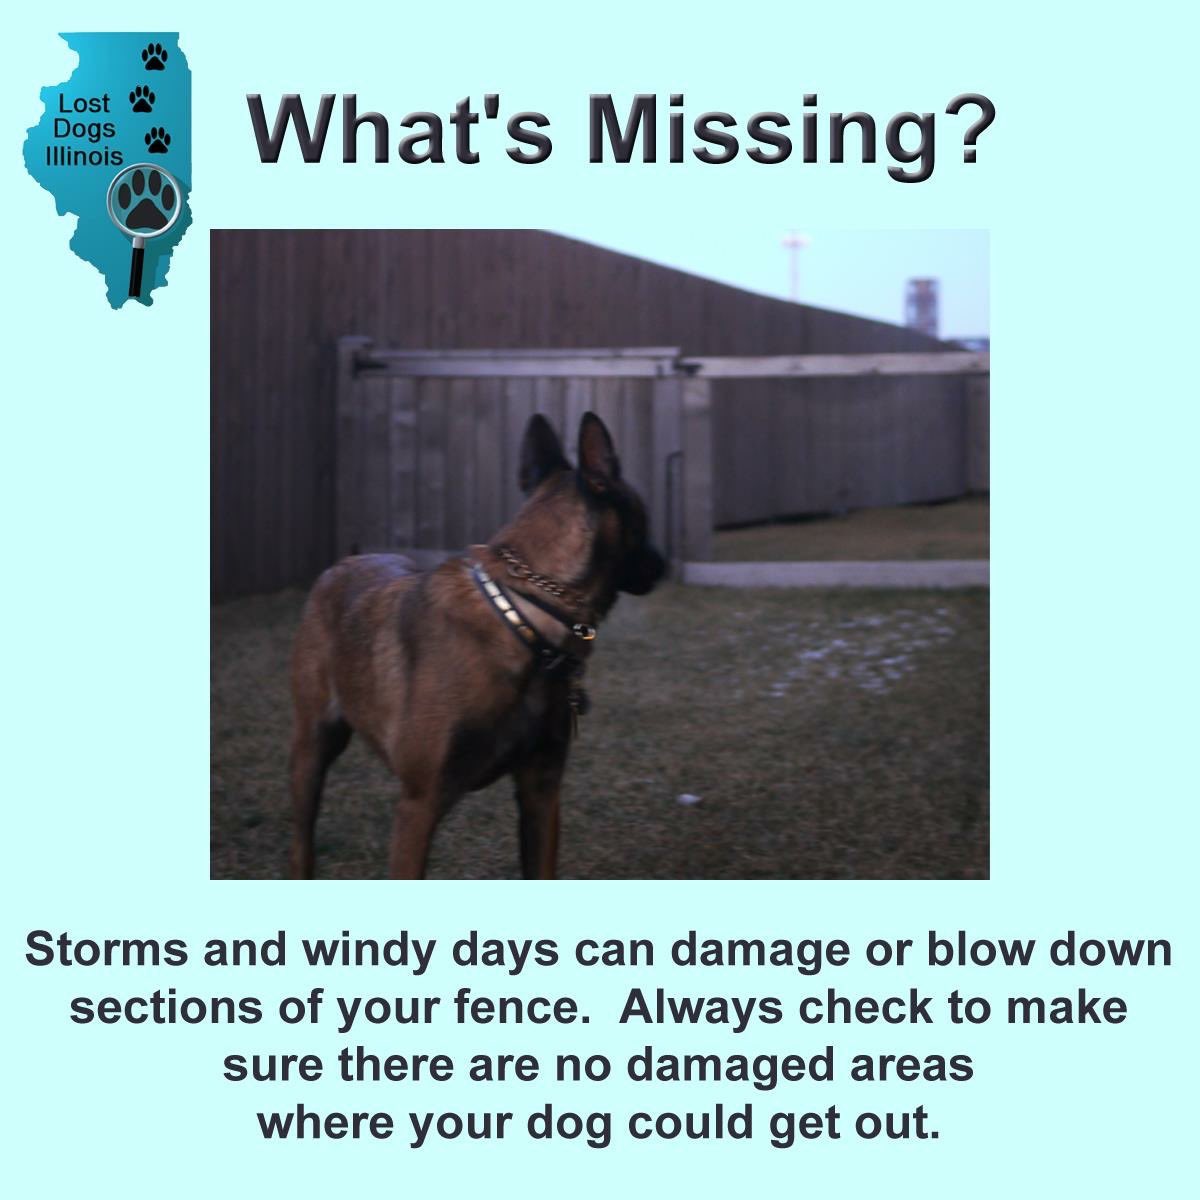 #OTLFP High winds have been much more prevalent in the last several months! Has it been windy recently where you live? Your fence could be damaged in high winds. Check the entire perimeter carefully to make sure your pets can't get out!😱💨💨💨